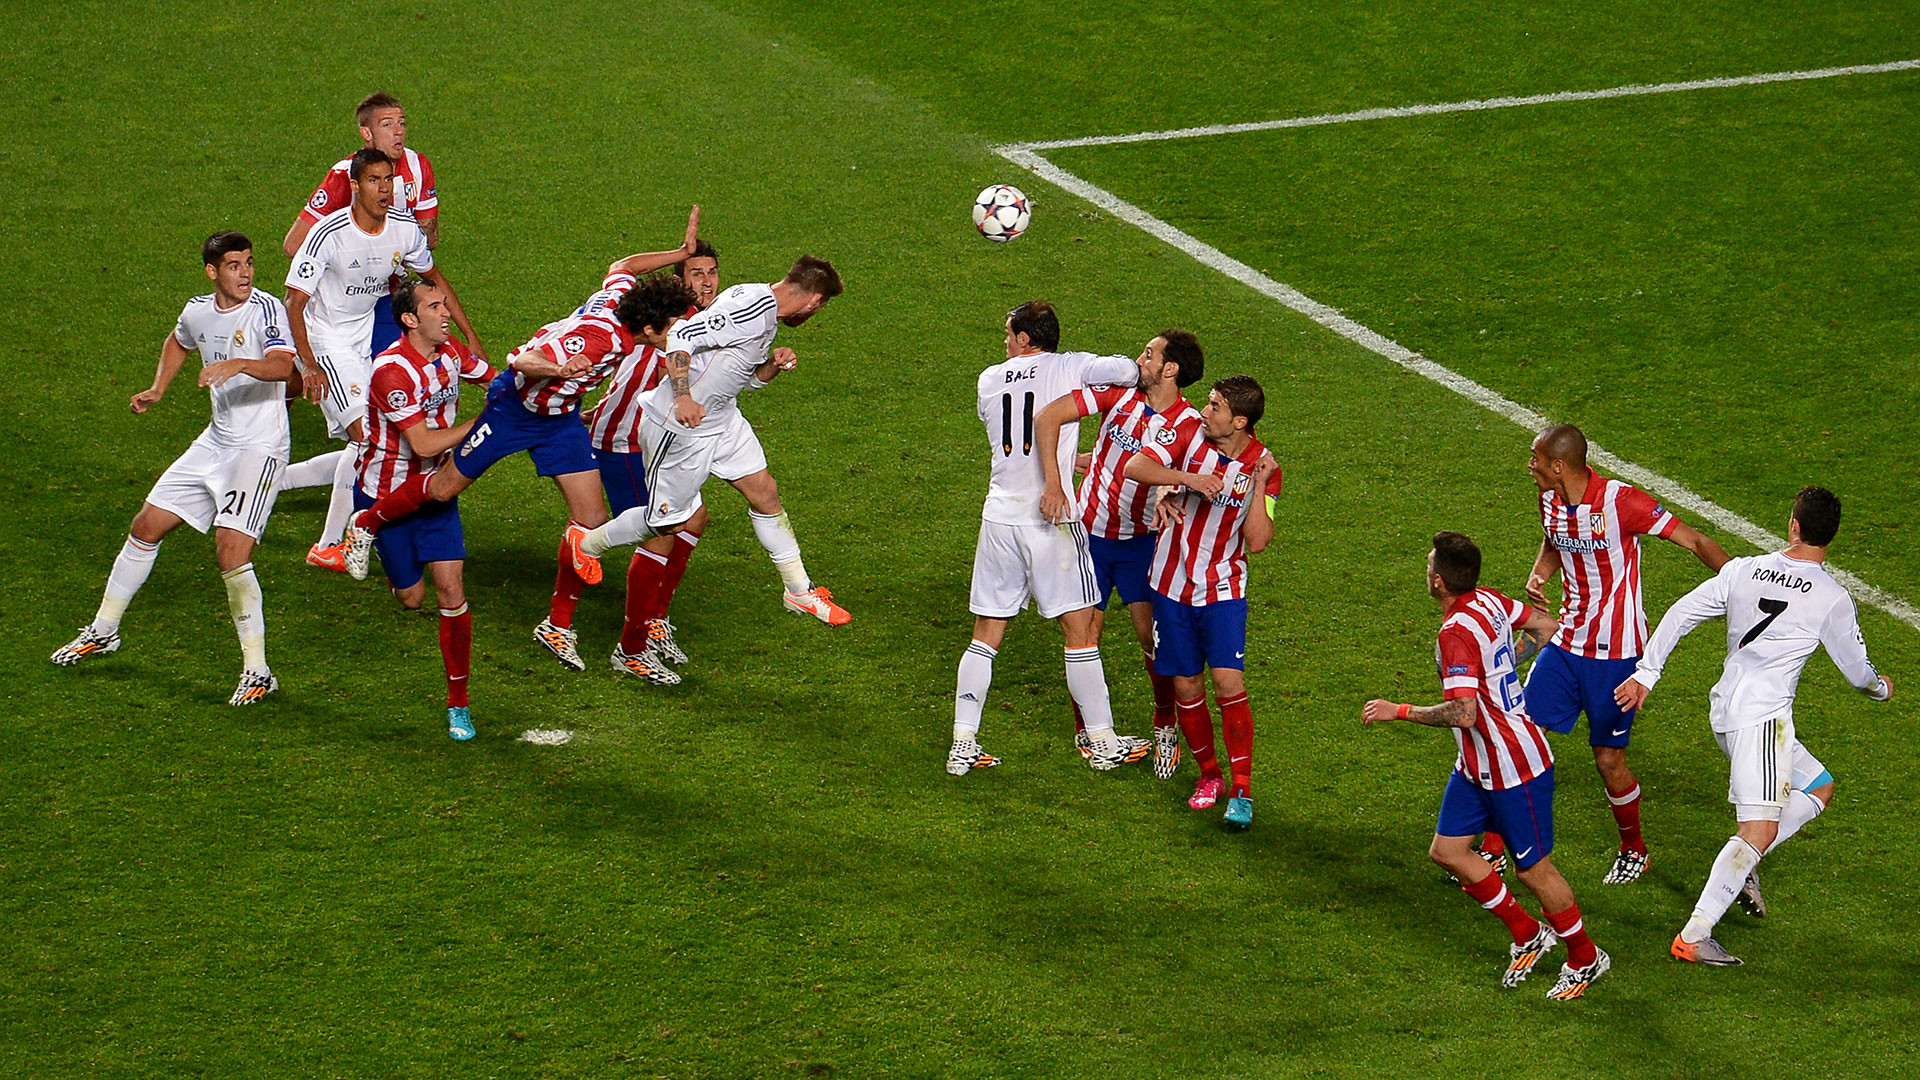 1920x1080 That Champions League win qualified Madrid for the Club World Cup in  December 2014, and again Ramos played a pivotal part en route to yet  another trophy as ...